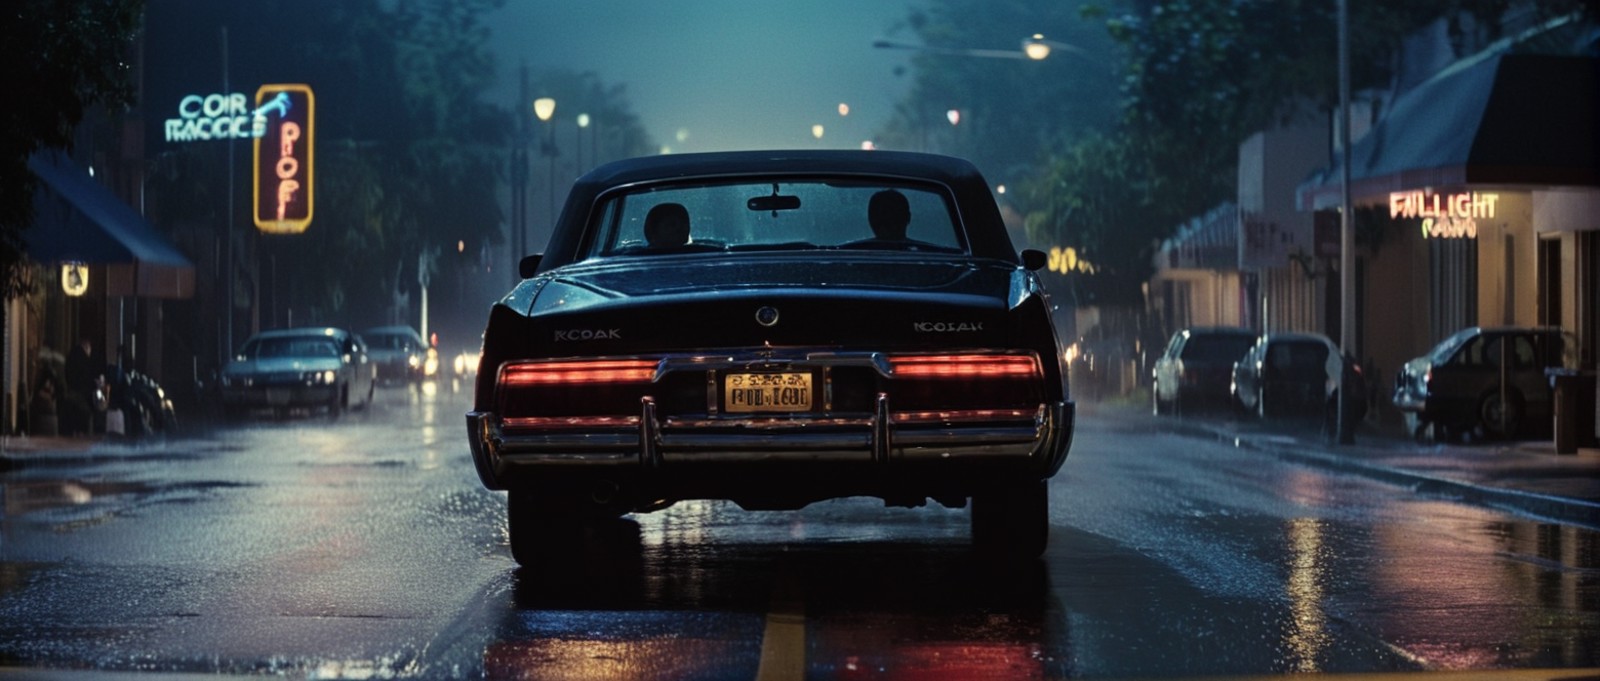 cinematic film still of  <lora:Pulp Fiction style:1>
a car driving down a wet street at night with head light on in front ...